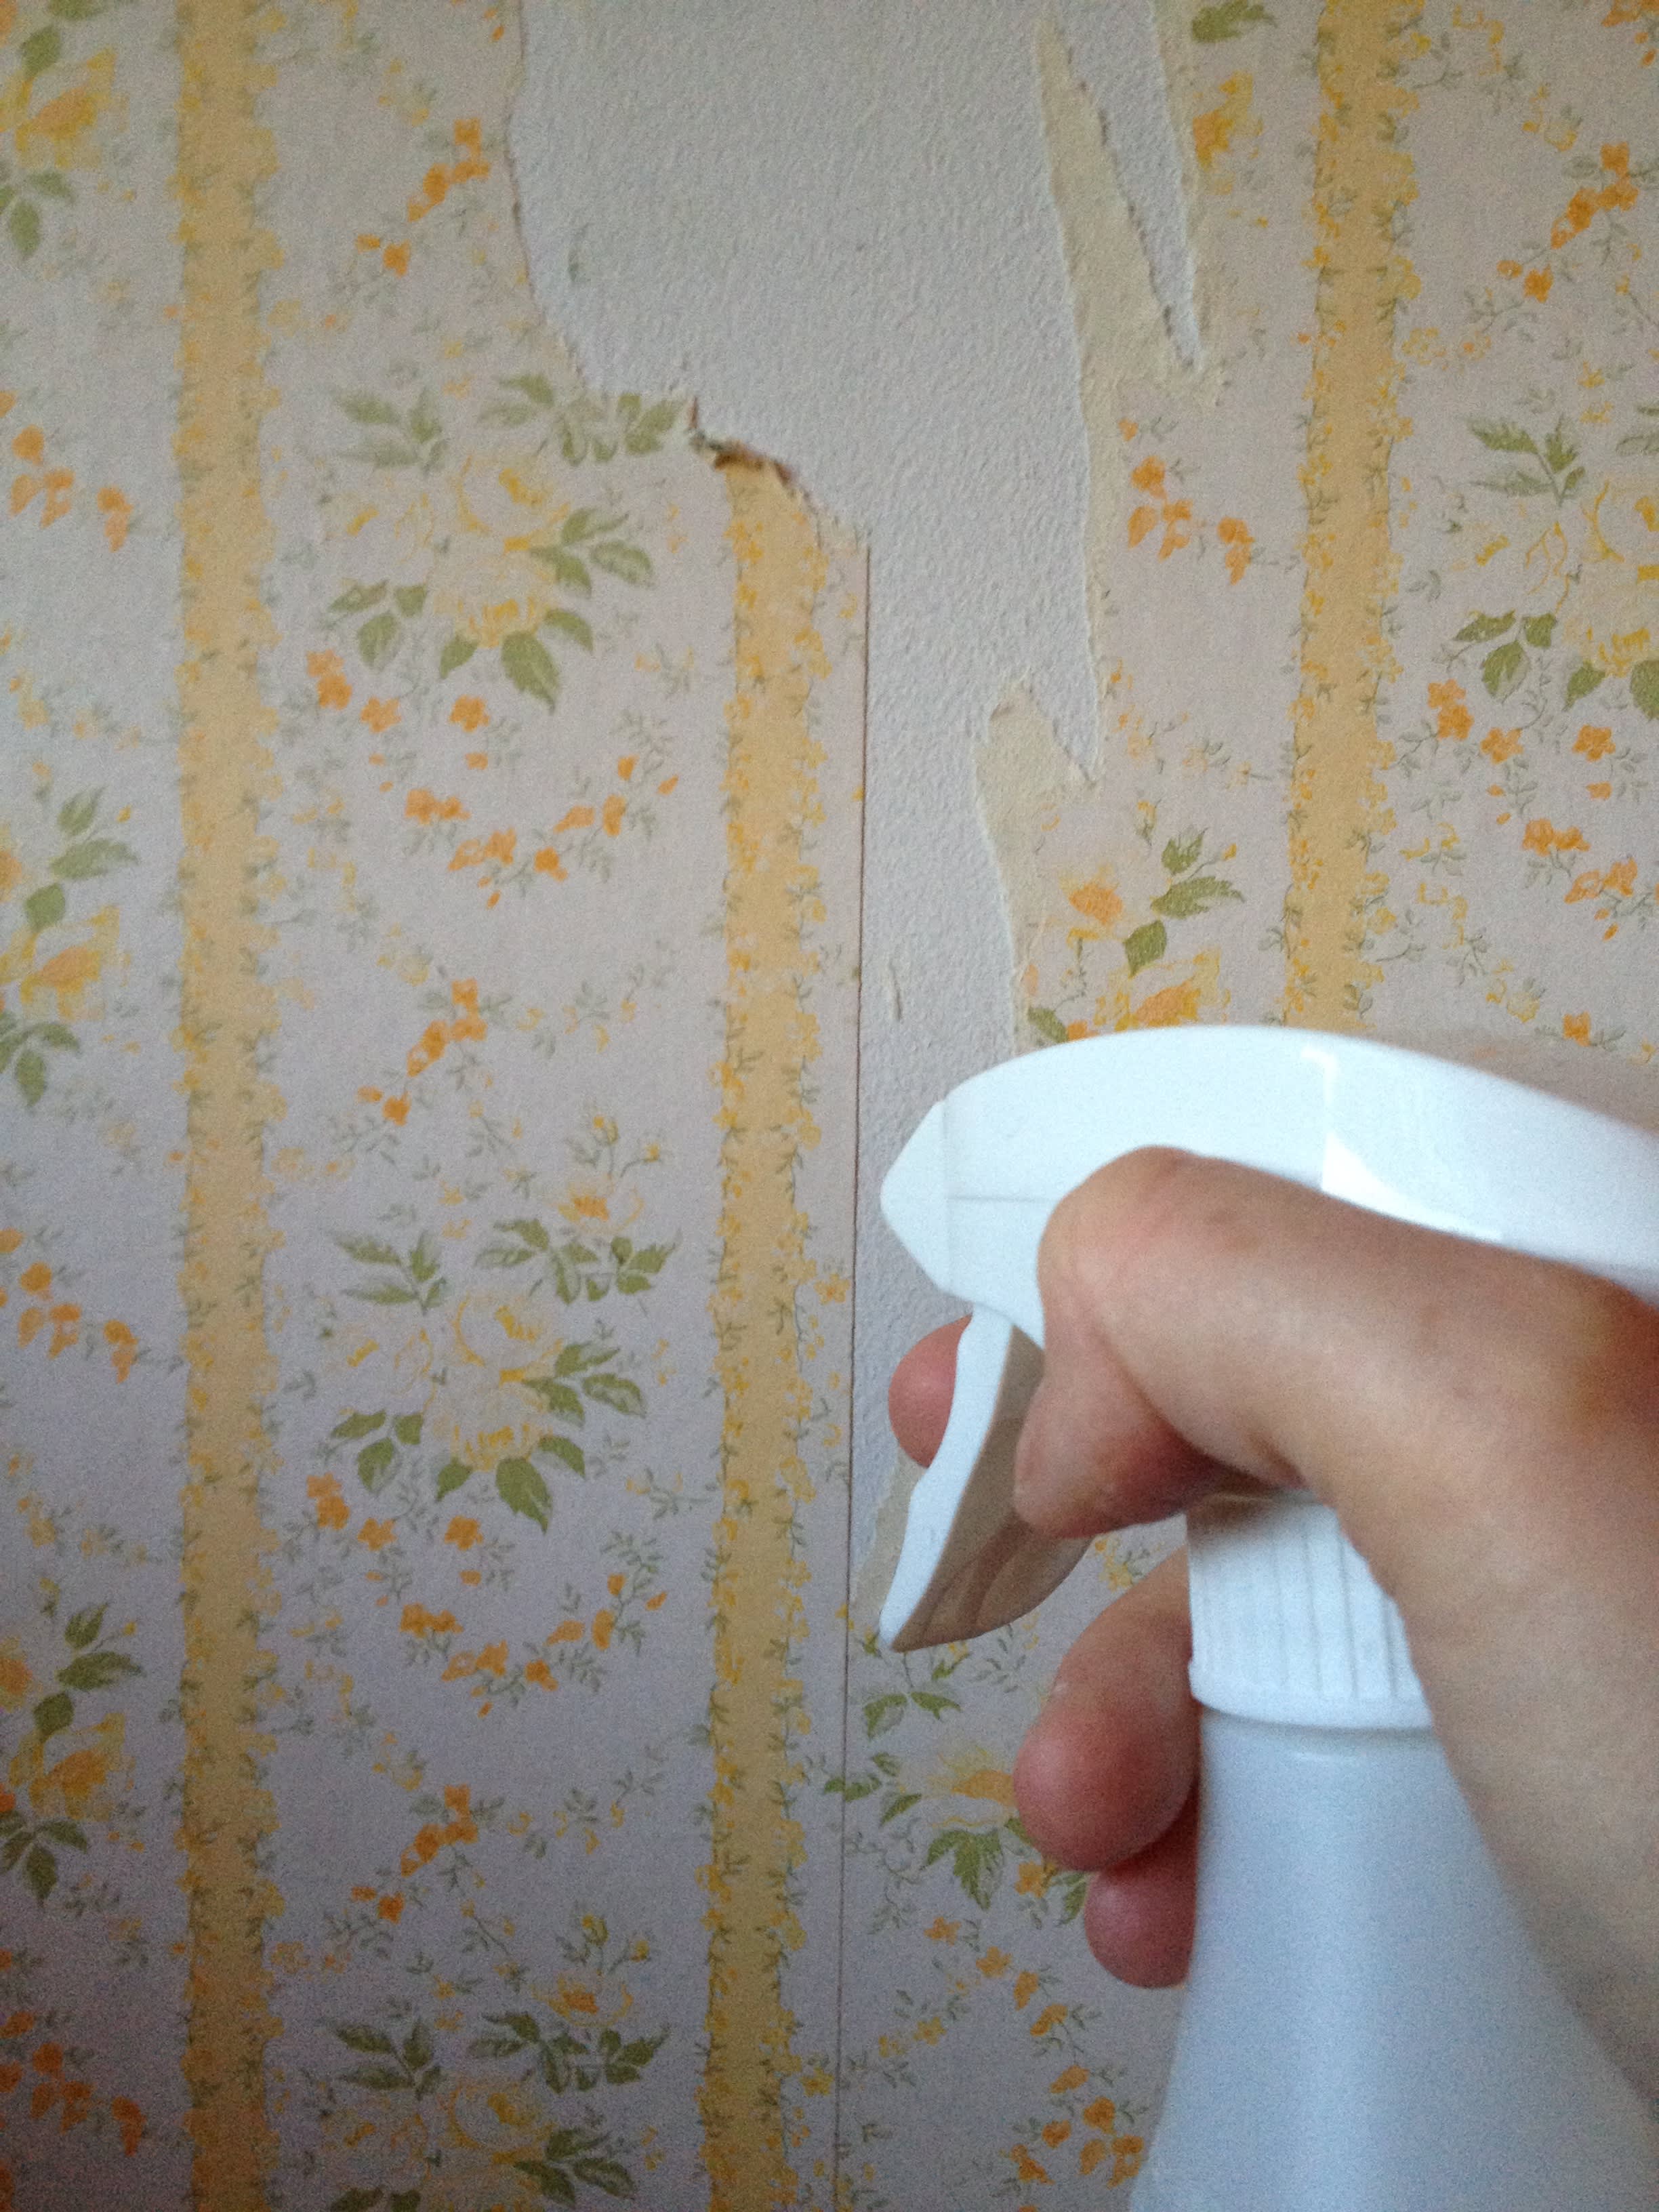 How to Remove Wallpaper  Do It Yourself  YouTube